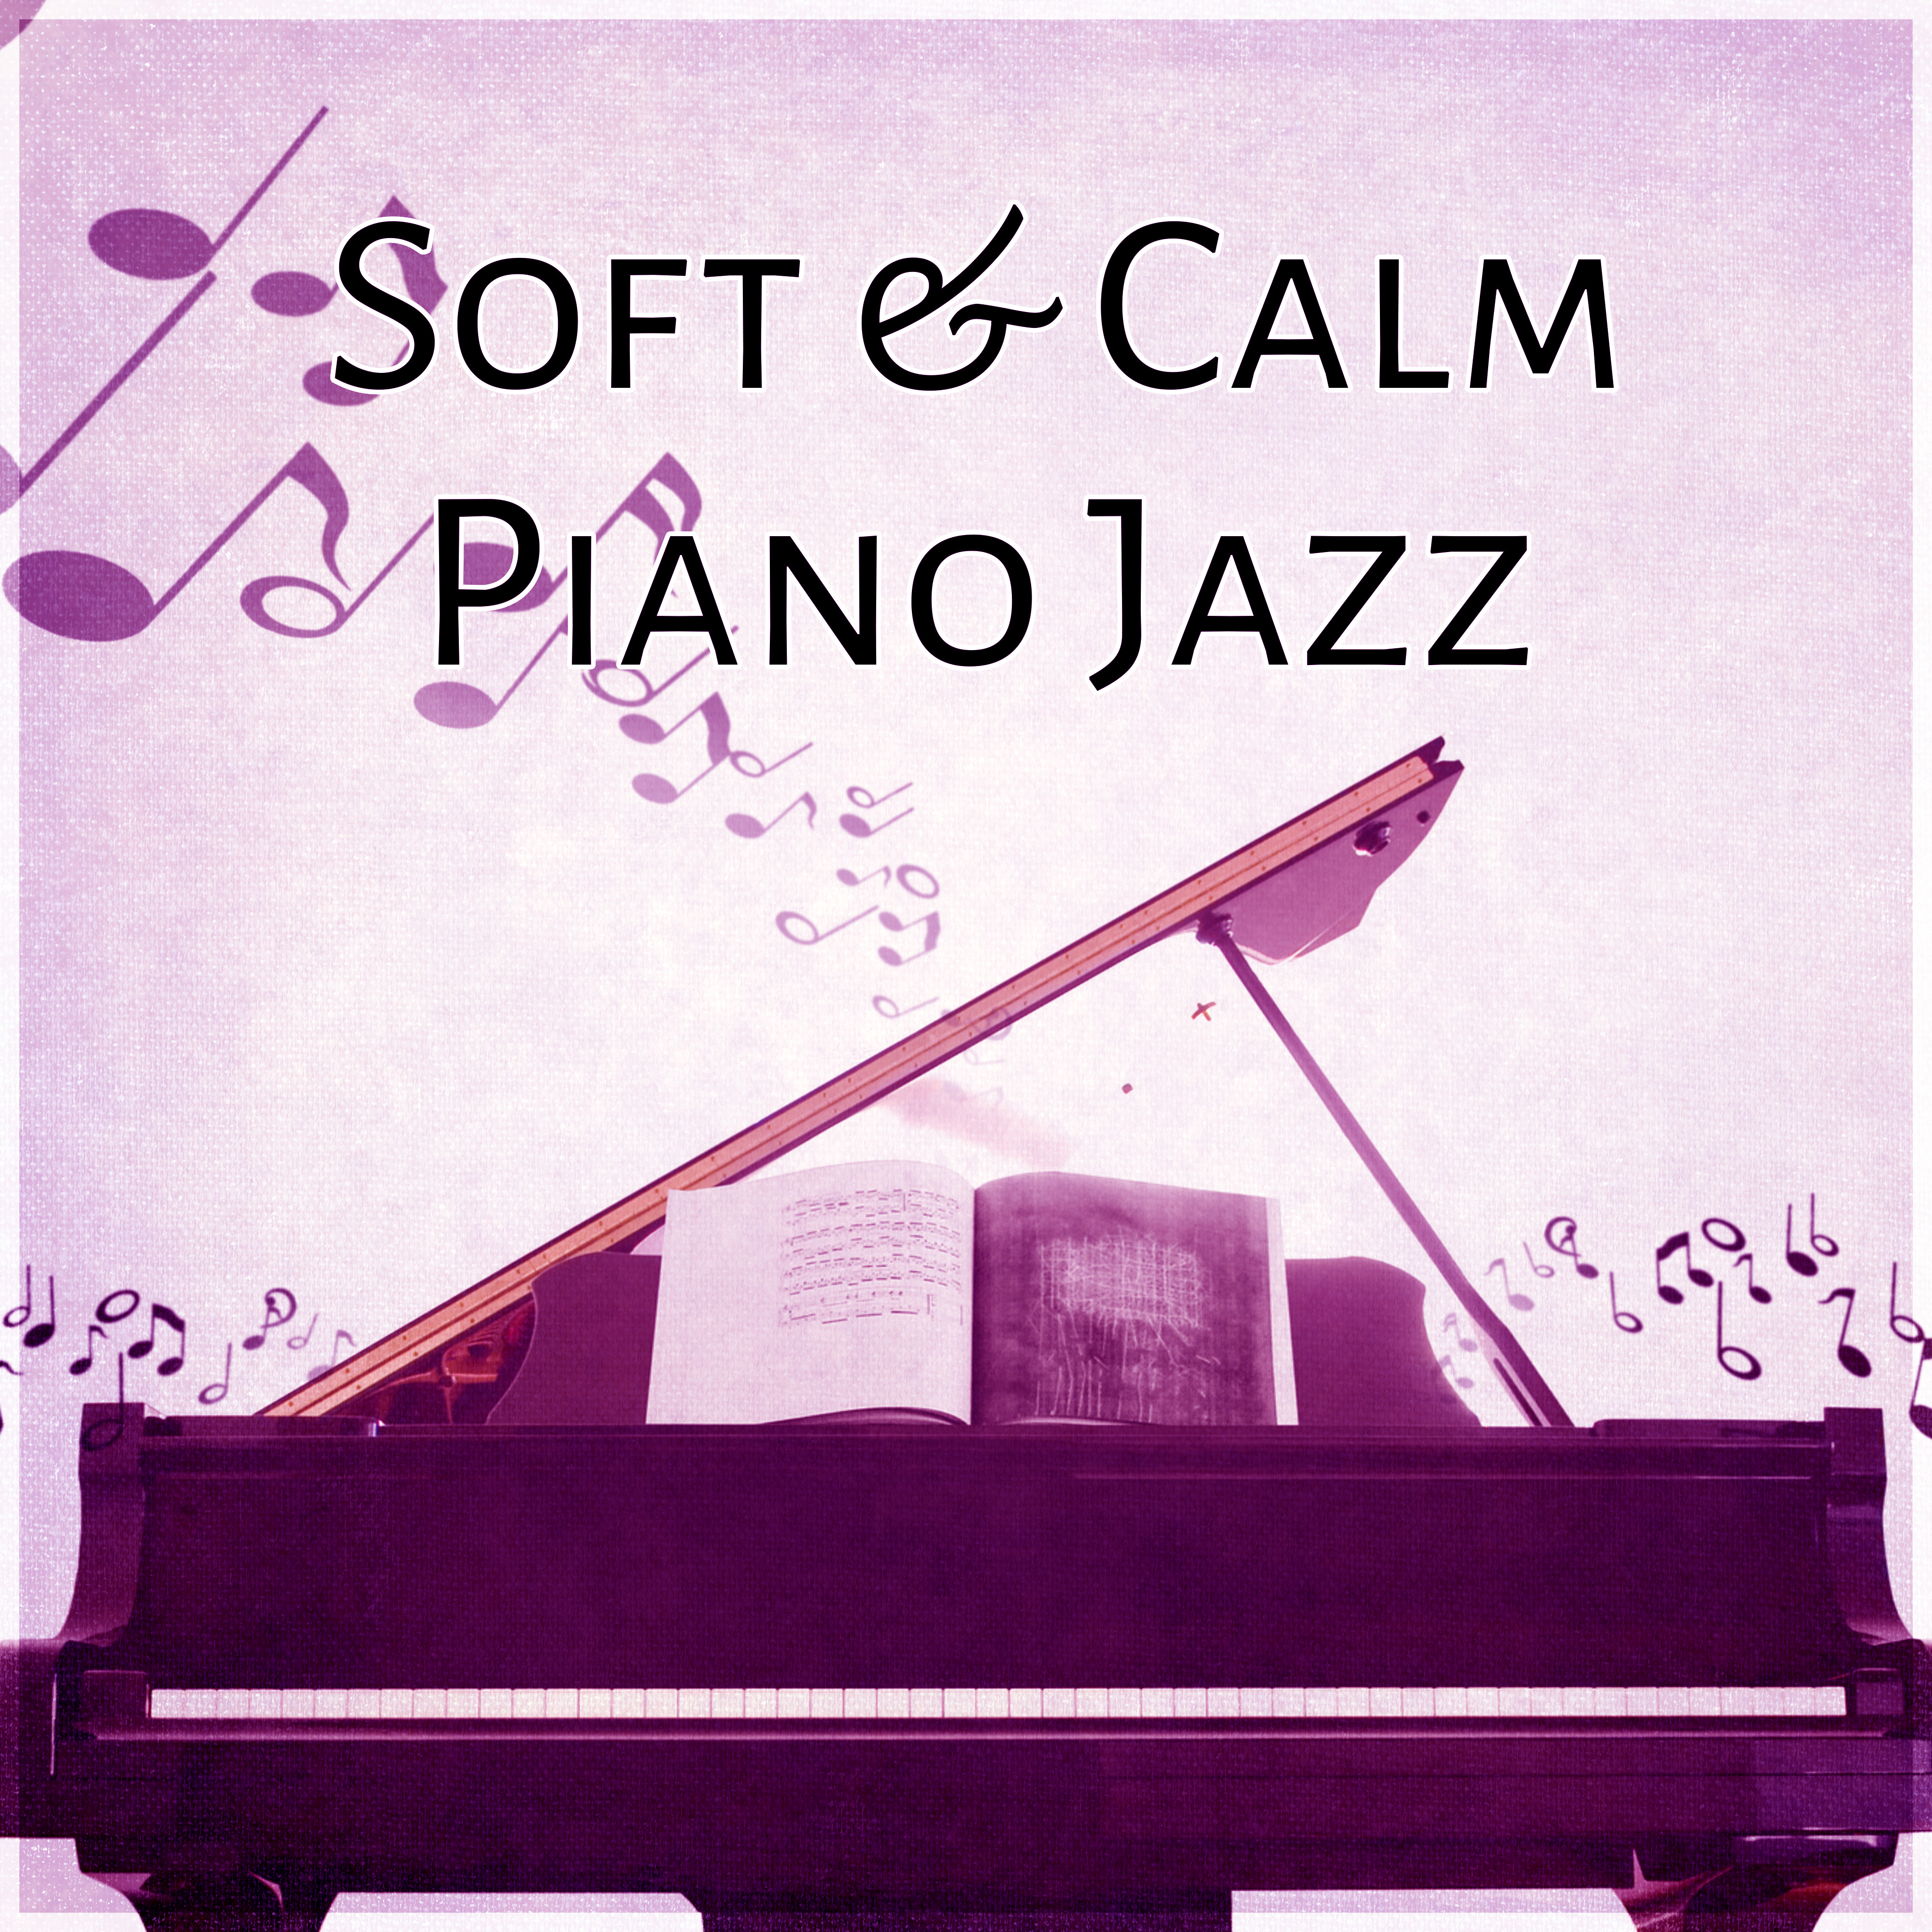 Soft & Calm Piano Jazz – Piano Jazz to Relax, Soft Jazz for Sensual Massage, Calming Background Sounds, Mellow Jazz, Slow and Sensual Piano Music